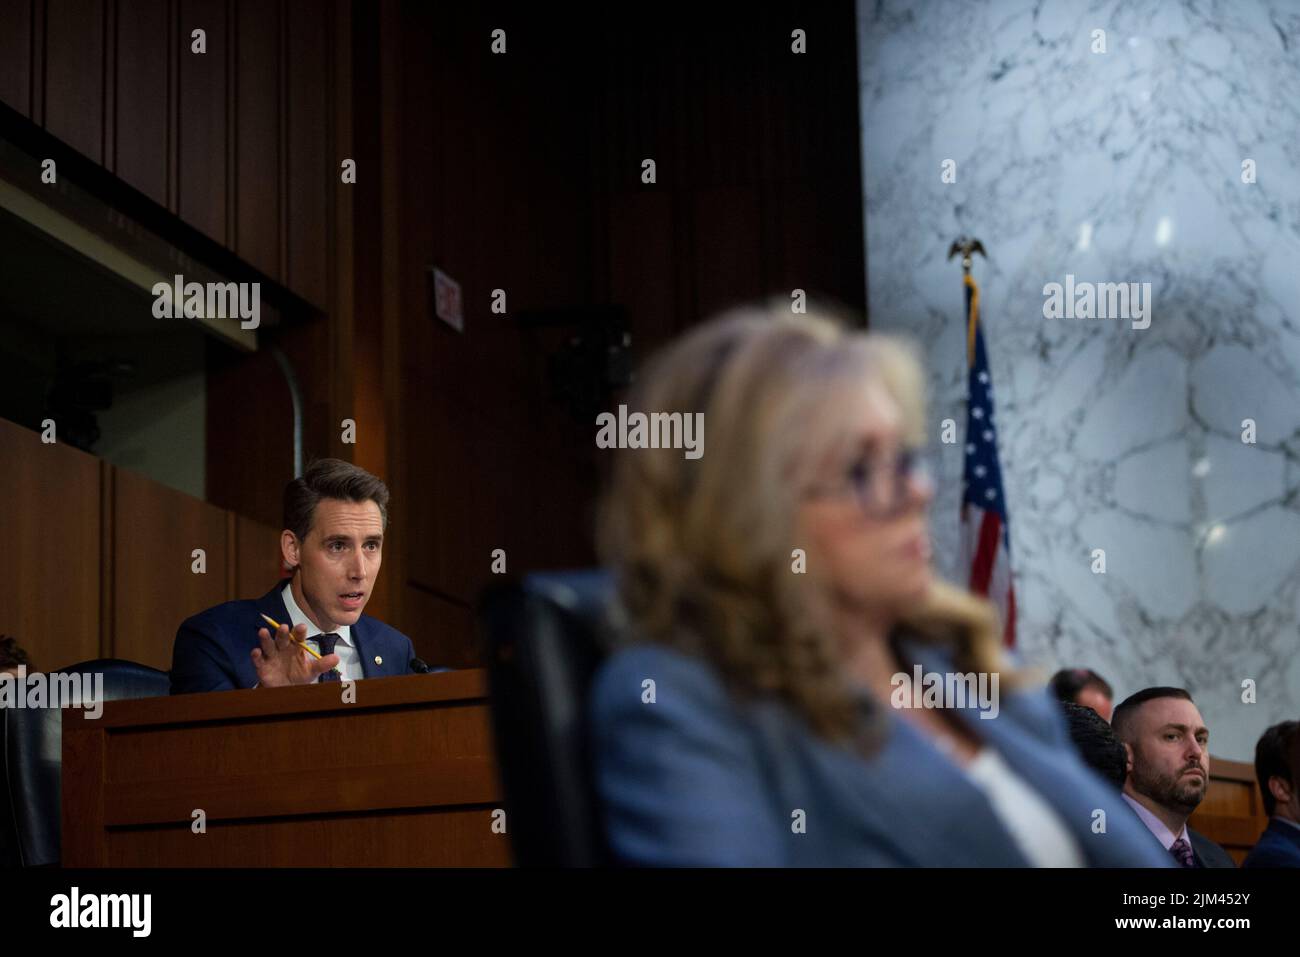 United States Senator Marsha Blackburn (Republican of Tennessee), right, listens while United States Senator Josh Hawley (Republican of Missouri), left, questions Christopher A. Wray, Director of the Federal Bureau of Investigation (FBI) during a Senate Committee on the Judiciary hearing to examine the Federal Bureau of Investigation, in the Hart Senate Office Building in Washington, DC, Thursday, August 4, 2022. Credit: Rod Lamkey/CNP Stock Photo